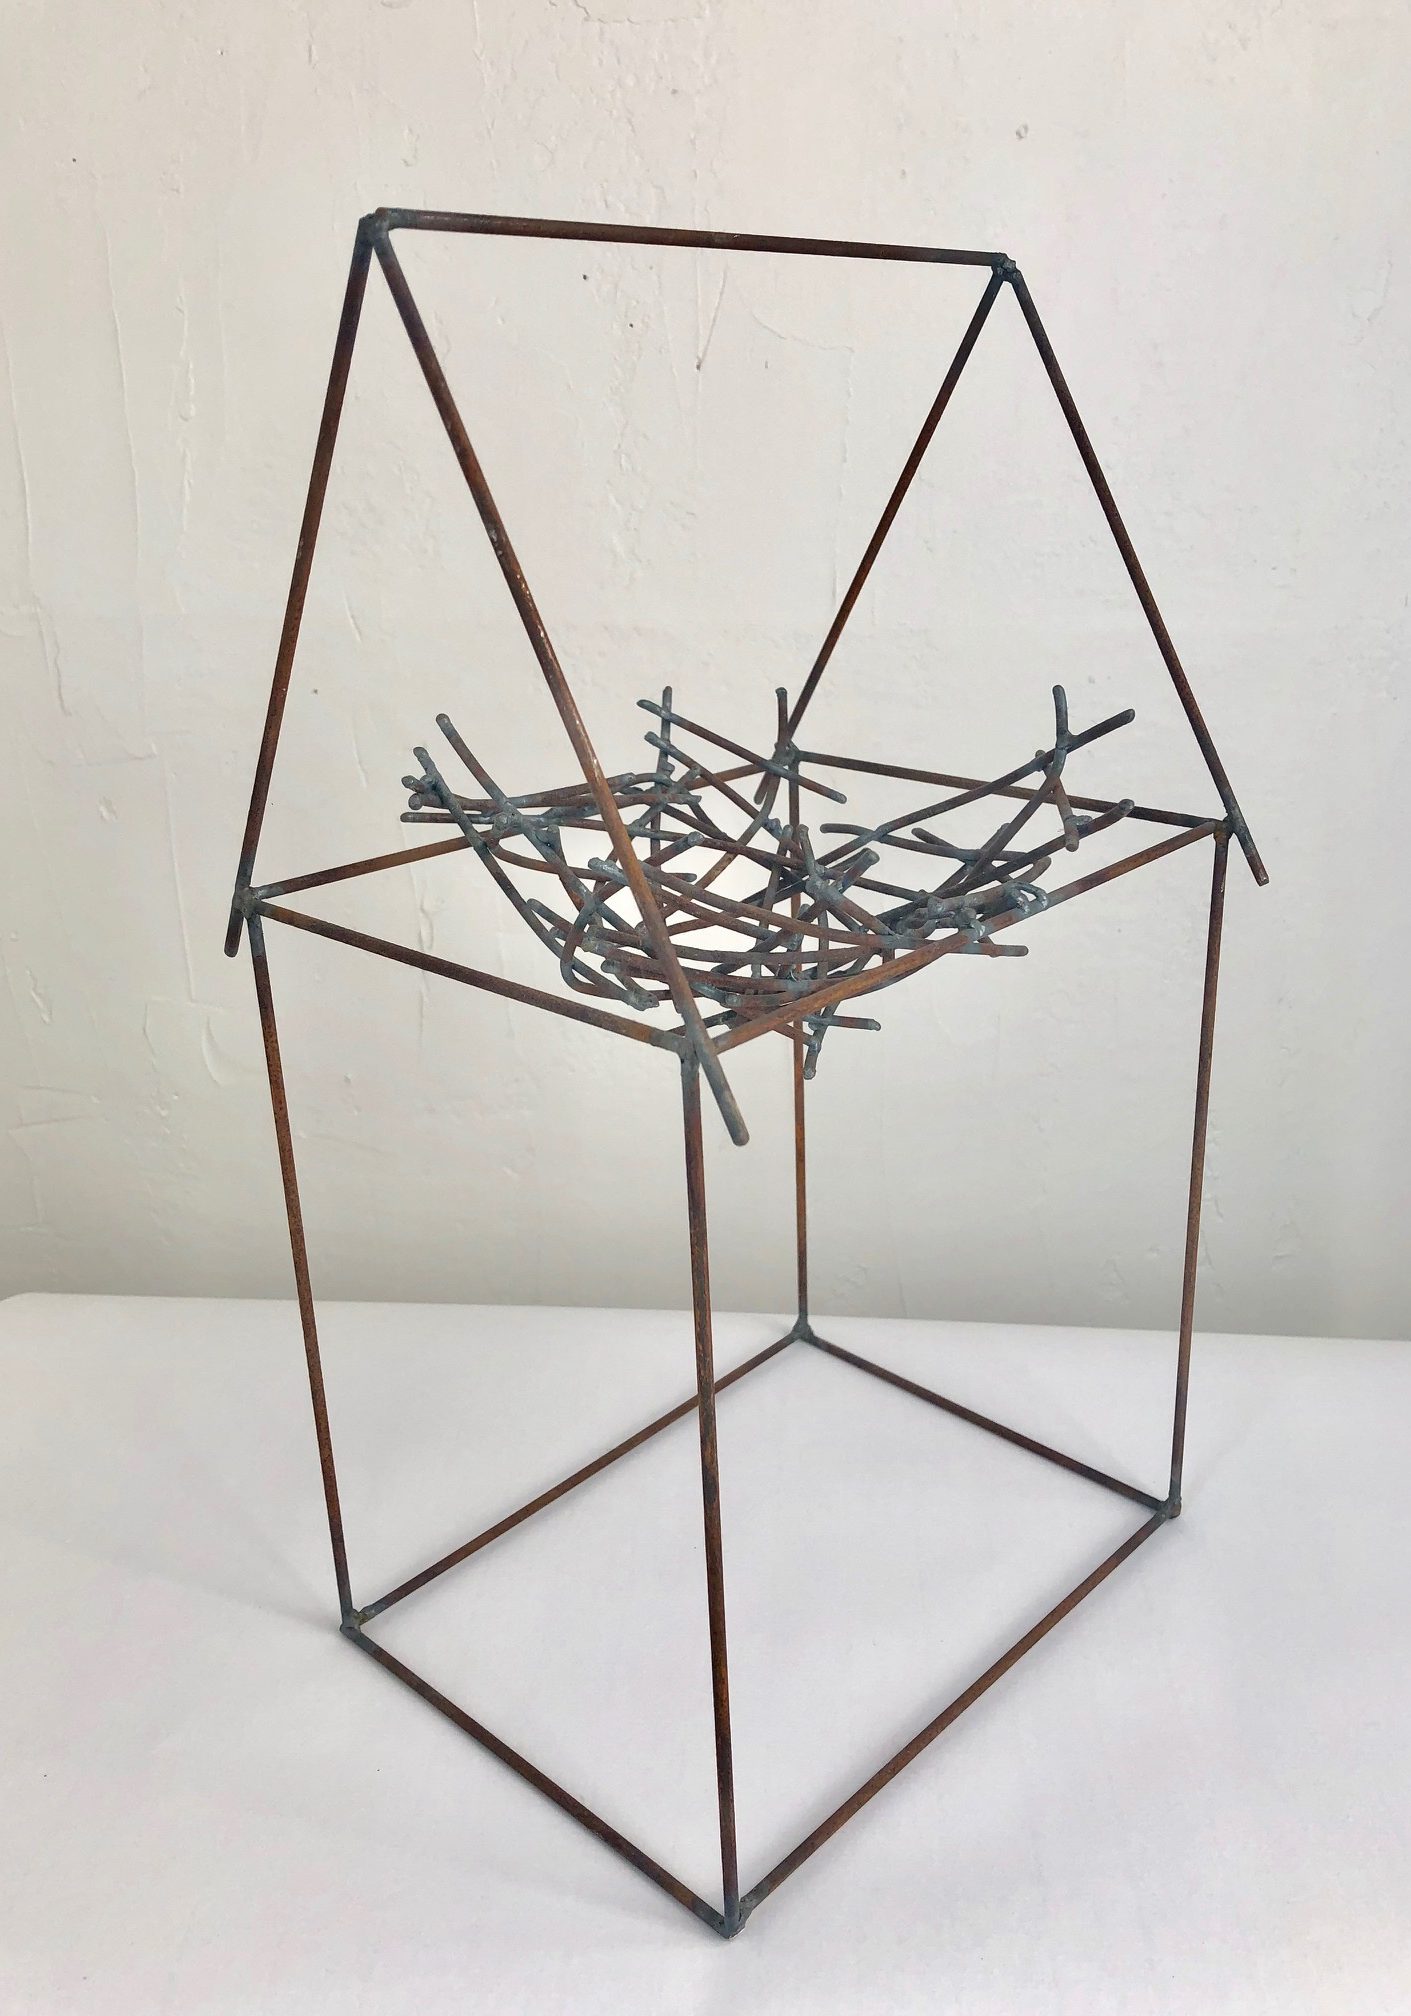 Kristin Garnant and v.skip willits, Nest House 2, 2019, recycled steel, 14x8x7 inches, collection of the artists